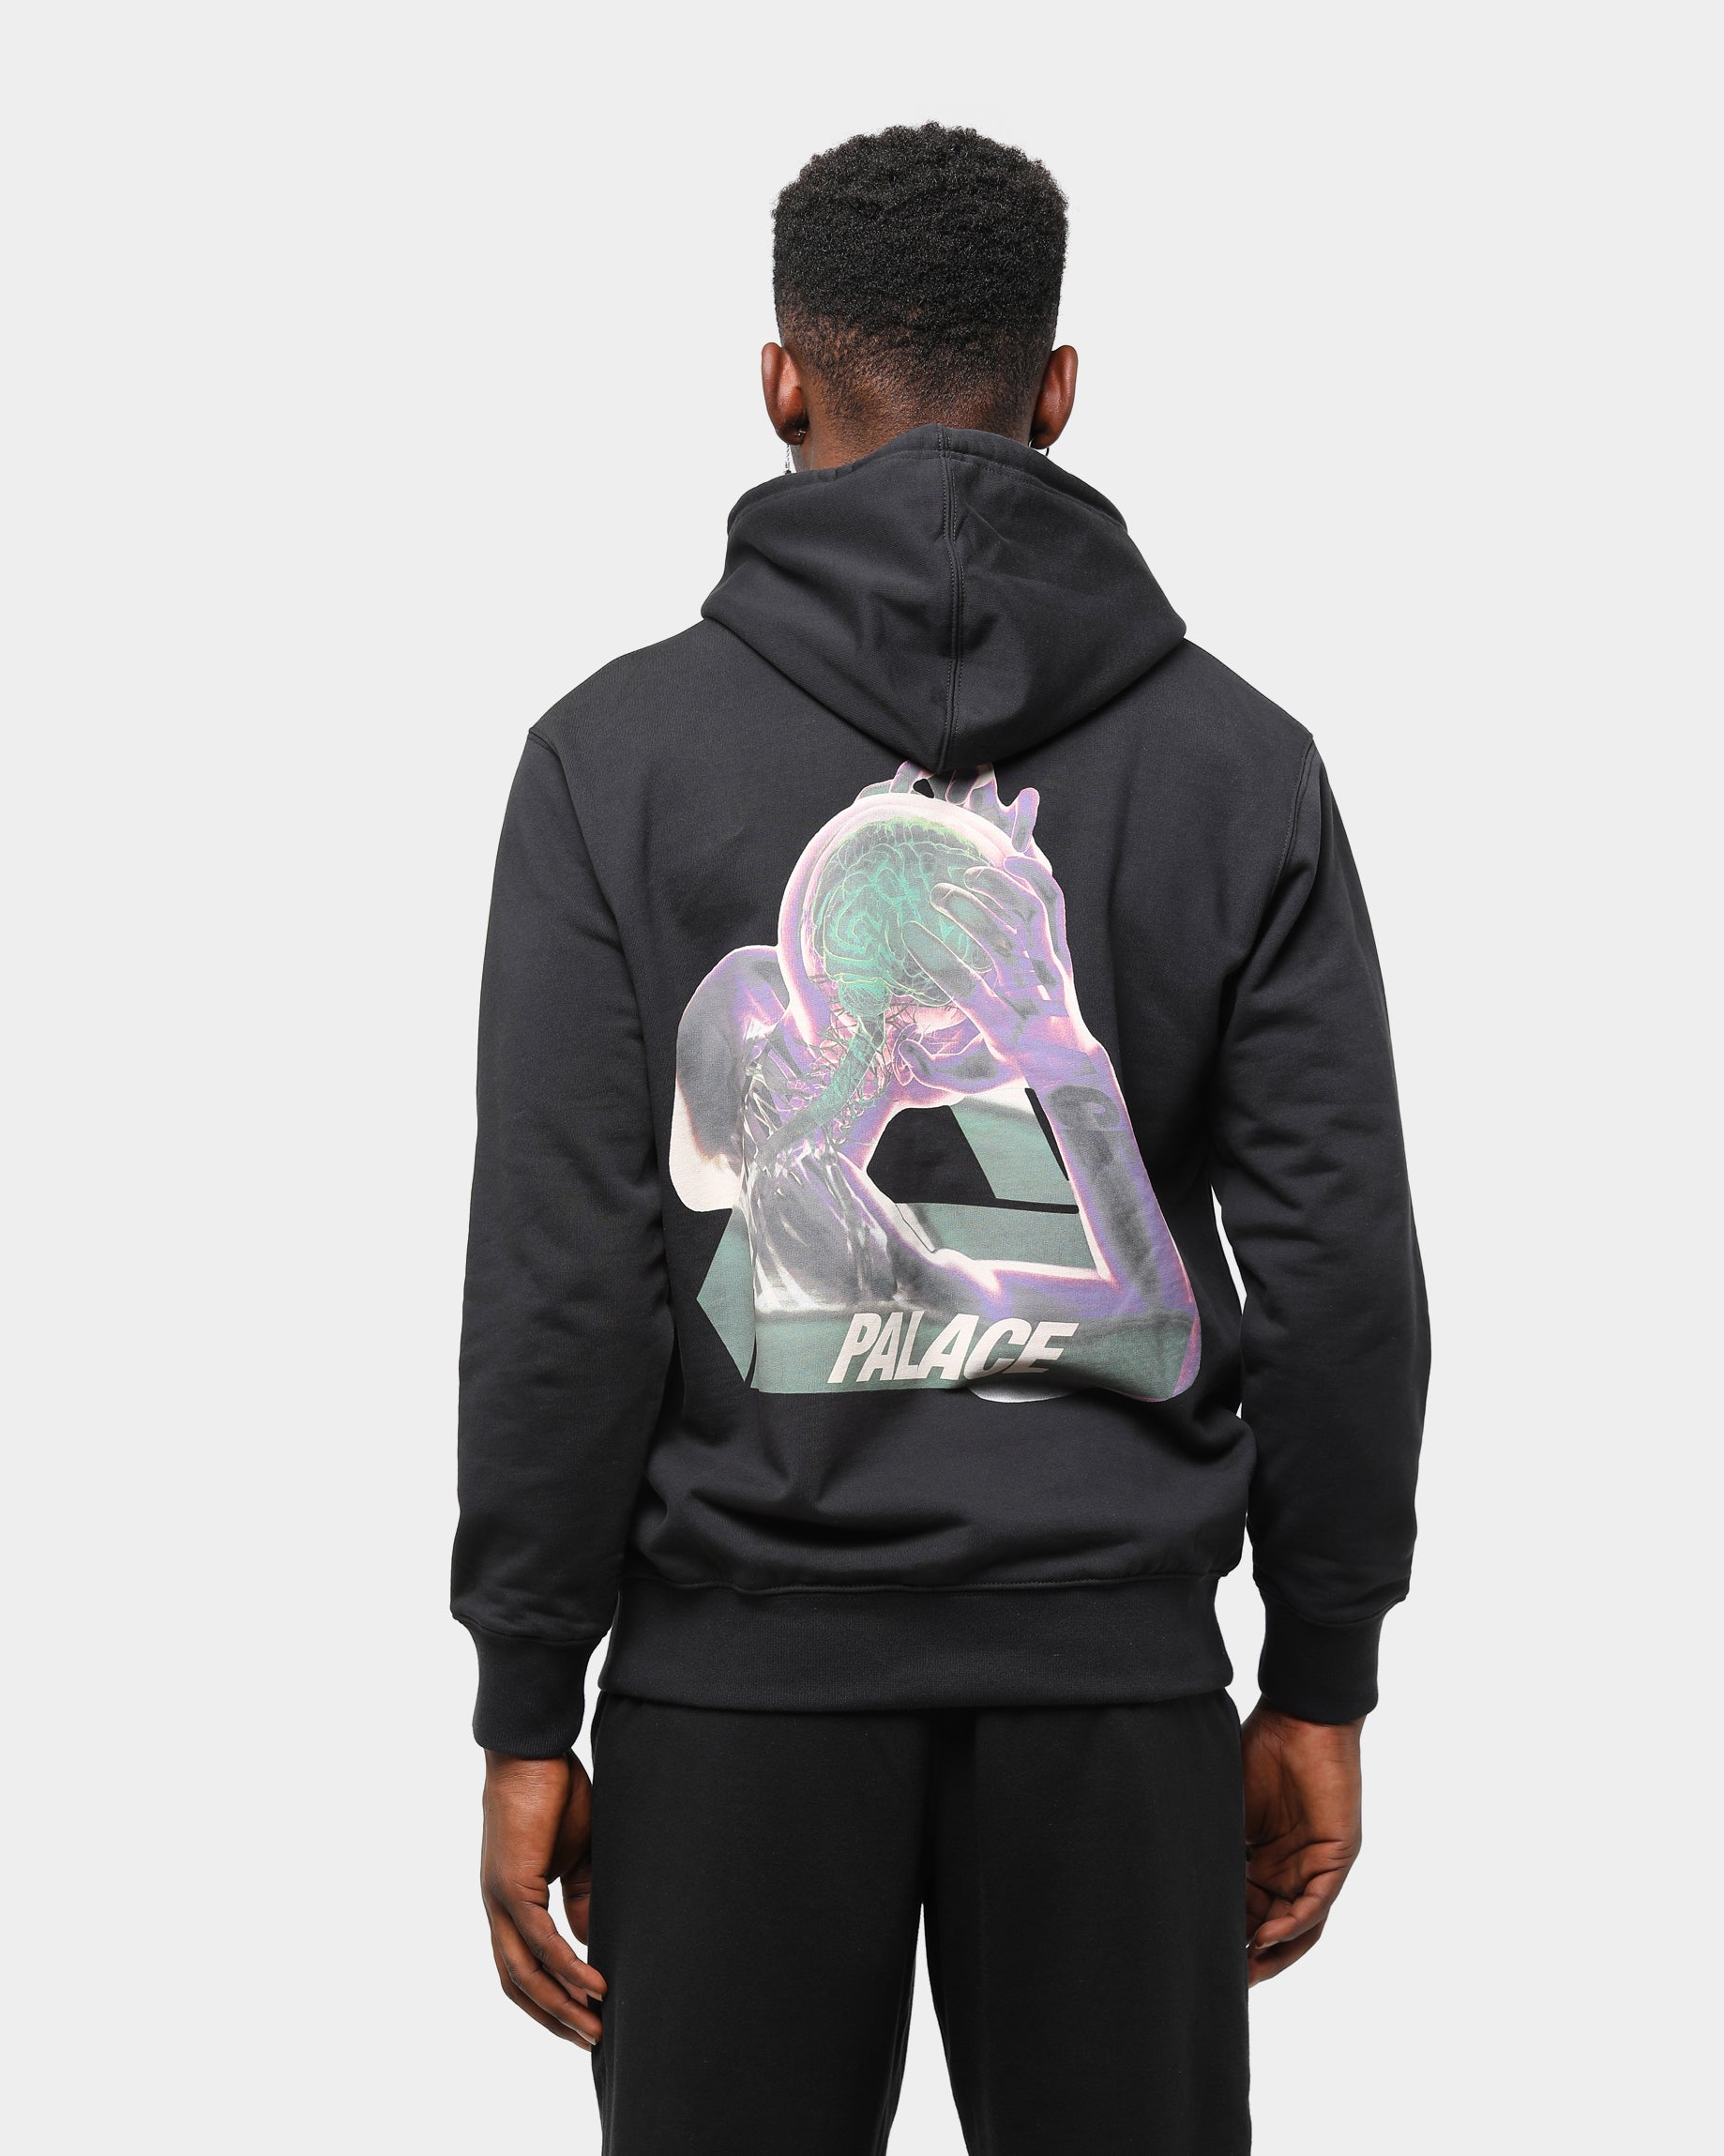 Palace Black Hoodie Store, 50% OFF | www.emanagreen.com